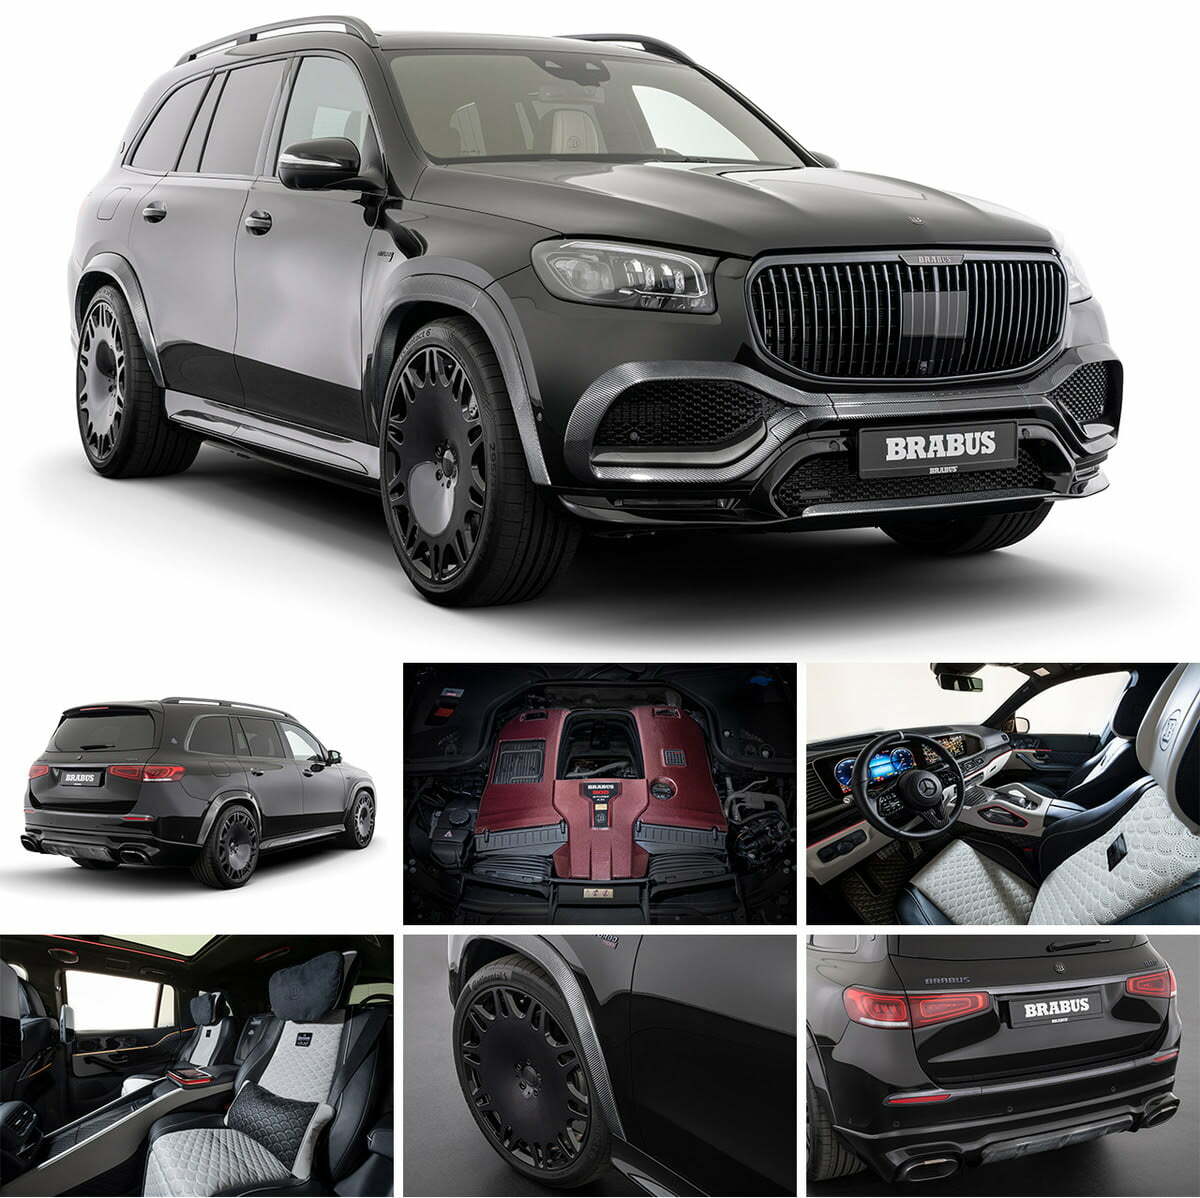 BRABUS 900 Mercedes-Maybach GLS 600 4MATIC Revealed!